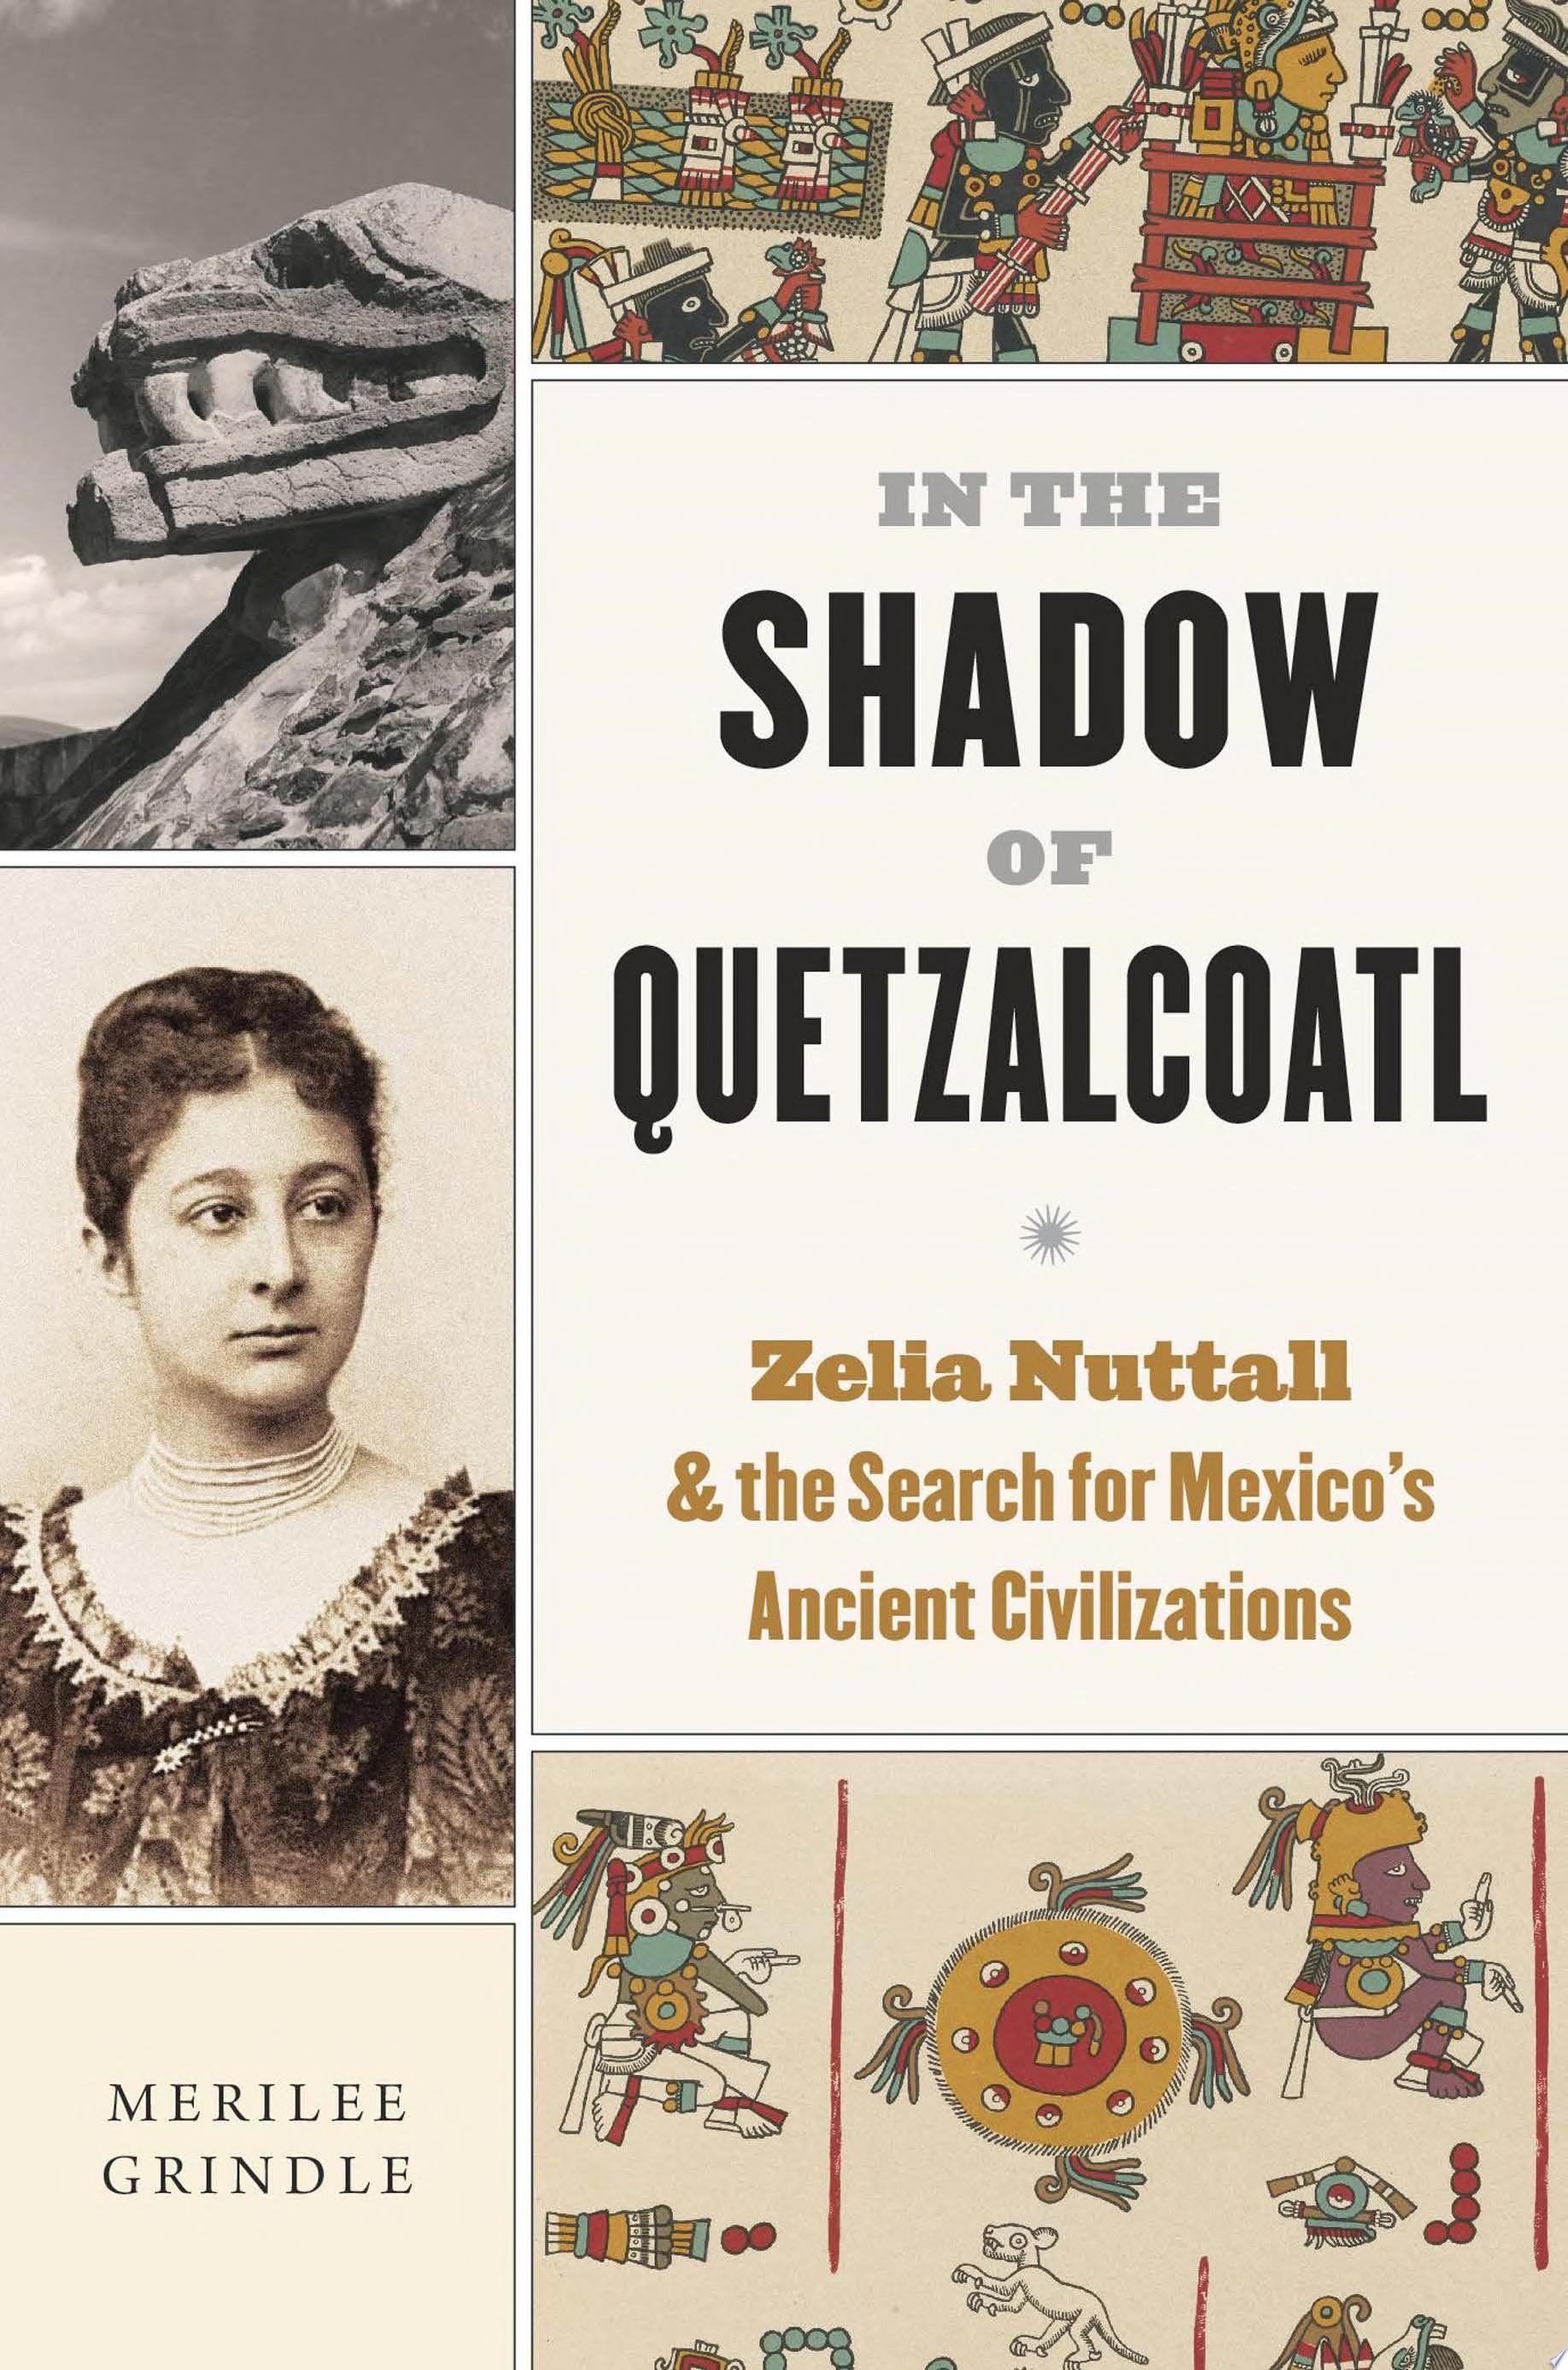 Image for "In the Shadow of Quetzalcoatl"